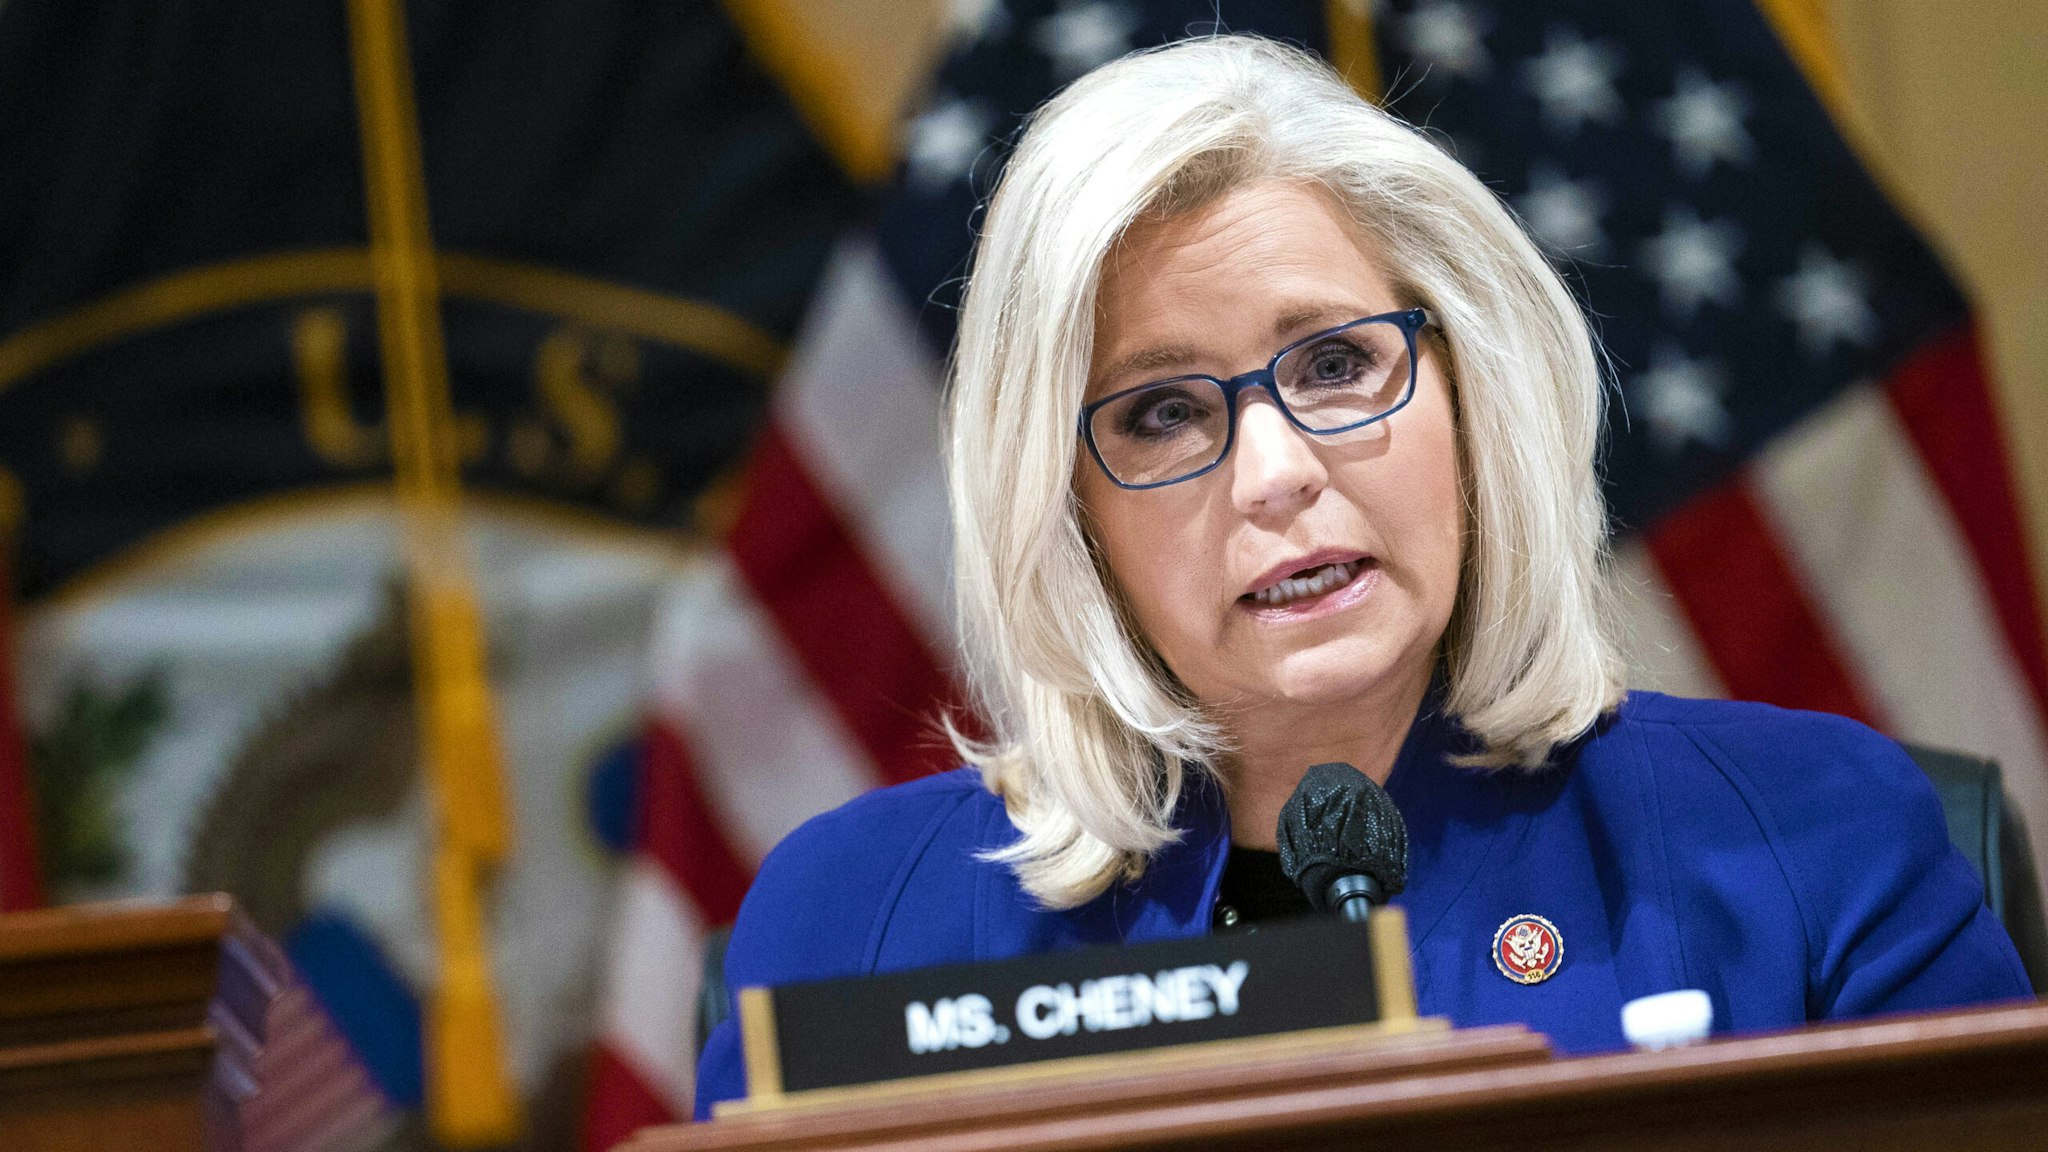 Representative Liz Cheney, a Republican from Wyoming, speaks during a business meeting of the Select Committee to Investigate the January 6th Attack on the U.S. Capitol in Washington, D.C., U.S., on Tuesday, Oct. 19, 2021. The committee probing the Jan. 6 riot at the U.S. Capitol is escalating its legal showdown with Steve Bannon with a vote recommending the full House hold him in criminal contempt for ignoring a congressional subpoena.